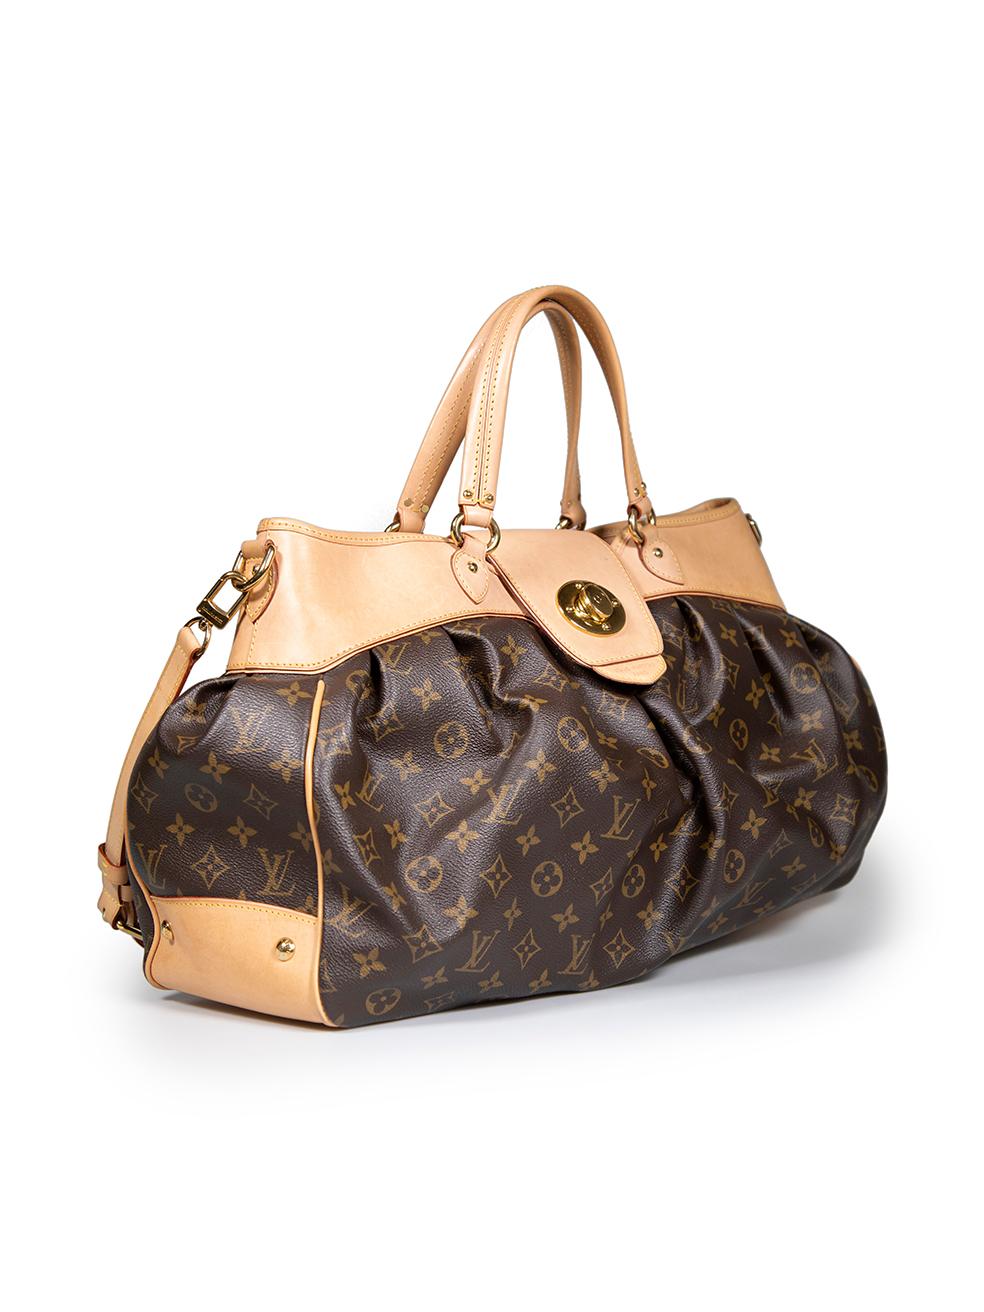 CONDITION is Good. General wear to bag is evident. Moderate signs of wear to the front, back, handles, base and sides with abrasions and marks to the leather on this used Louis Vuitton designer resale item.
 
 
 
 Details
 
 
 Model: Boetie GM
 
